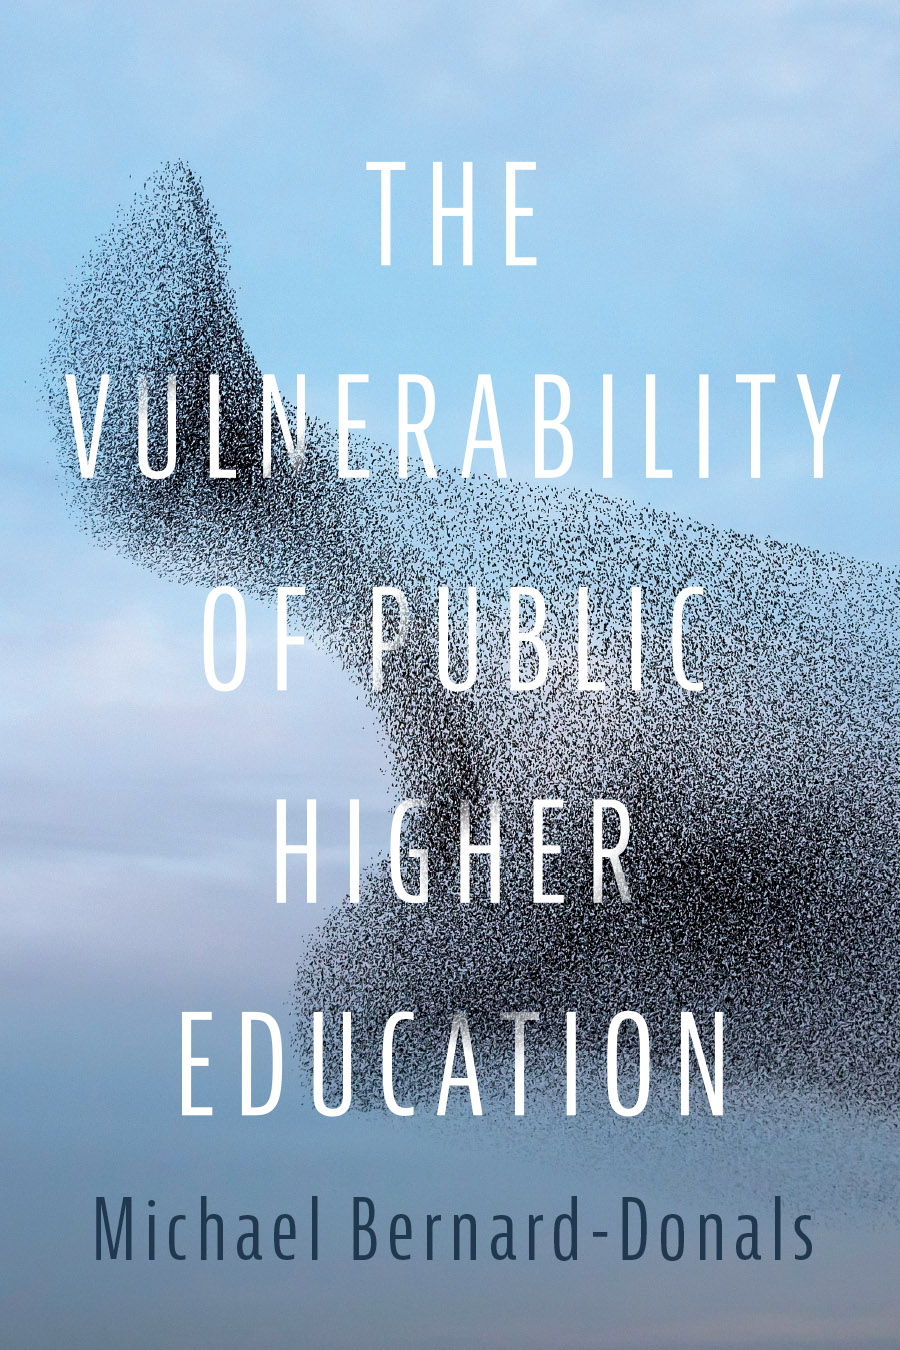 Front cover of The Vulnerability of Public Higher Education, by Michael Bernard-Donals, featuring an image of a large group of birds flying in a shape that will shift when they change direction.